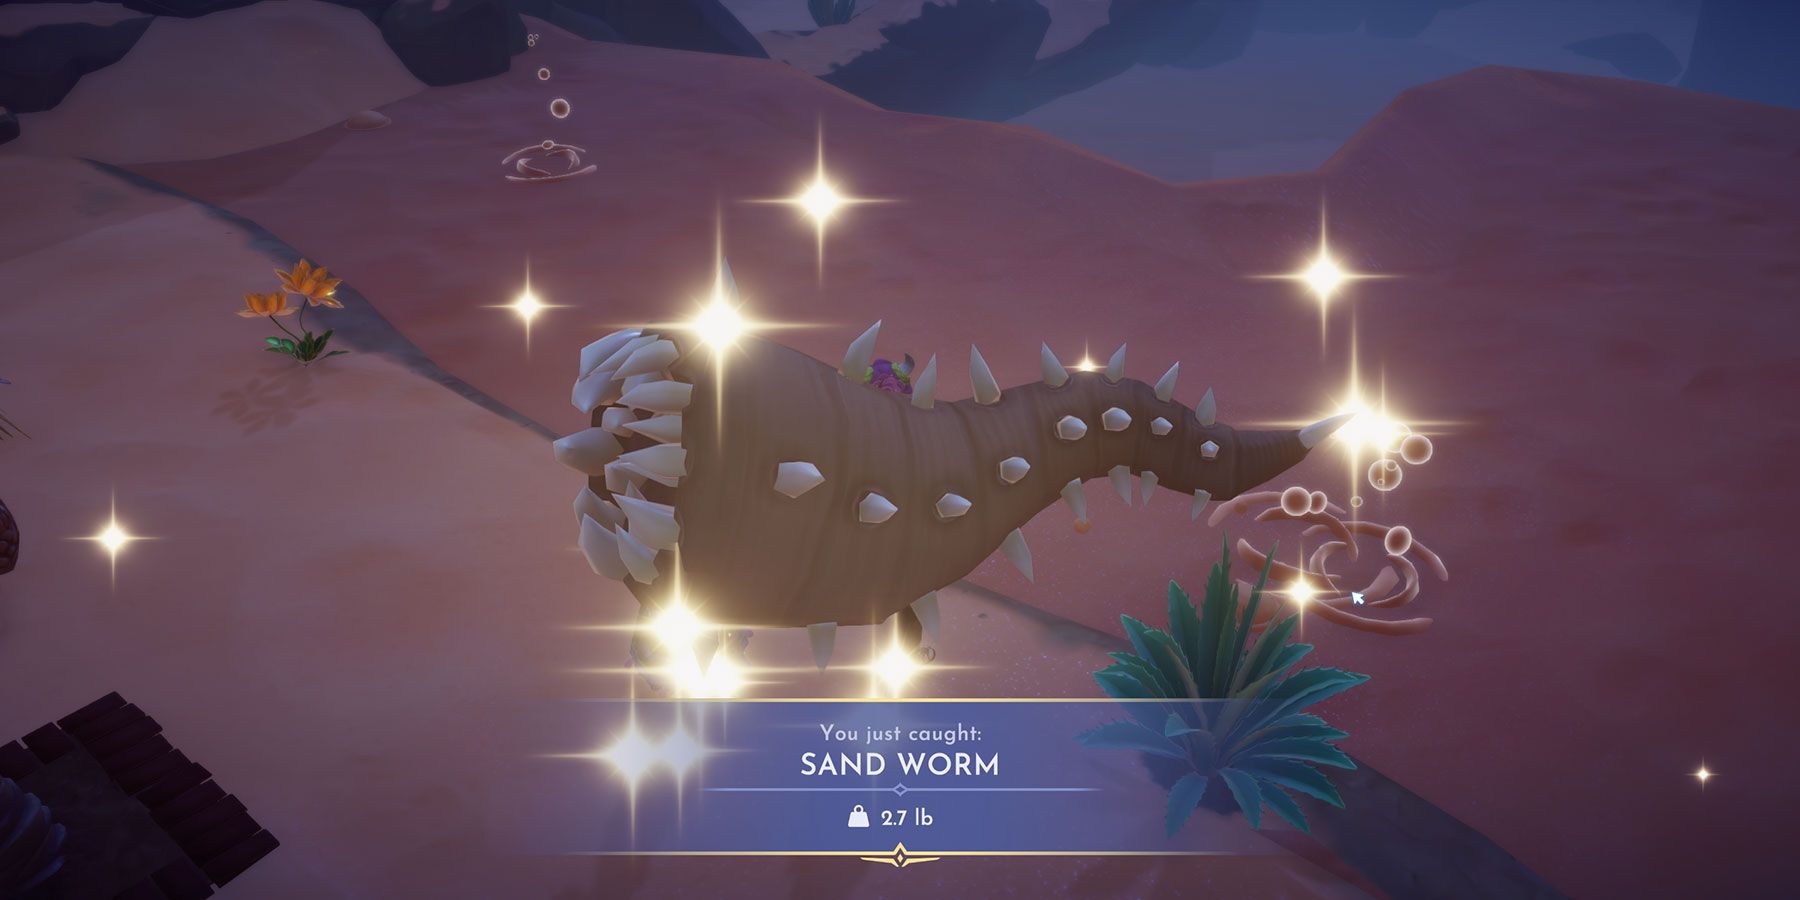 Catching a Sand Worm in Disney Dreamlight Valley